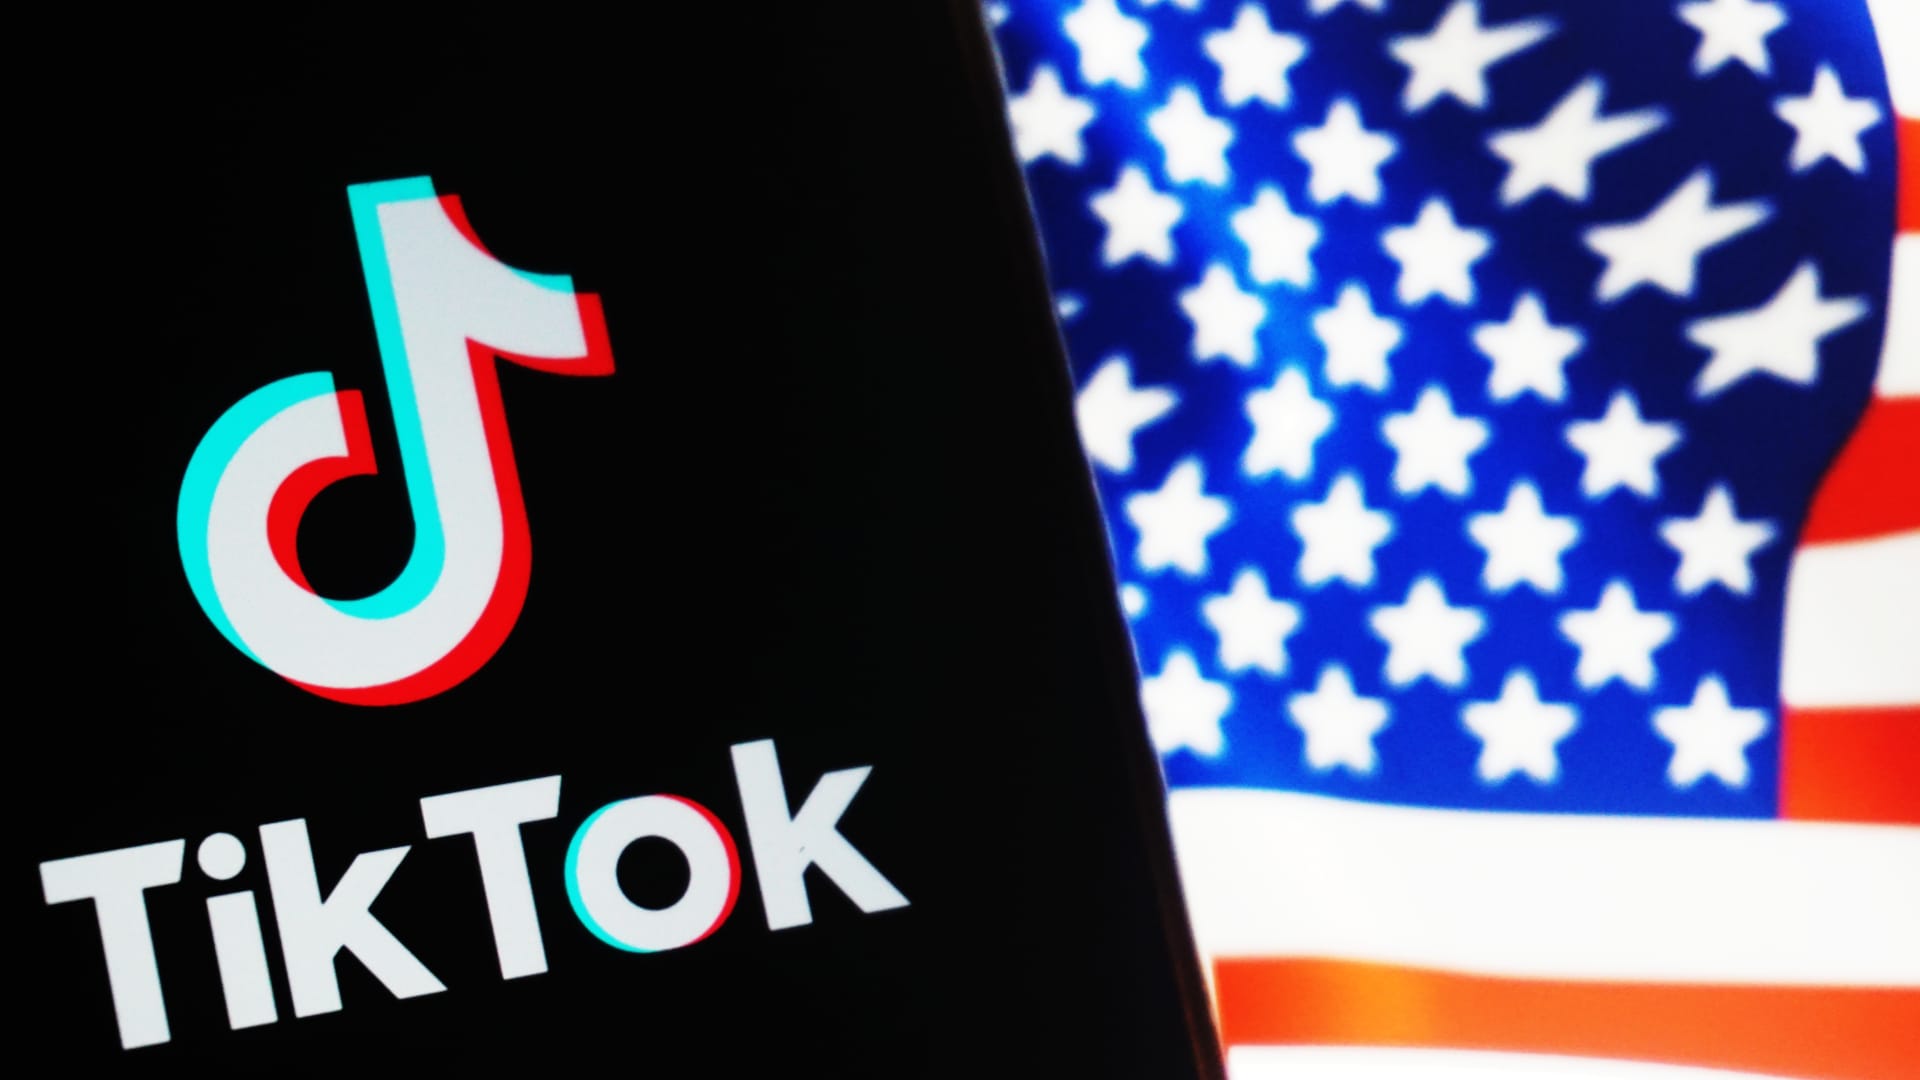 TikTok confirms the U.S. has threatened ban if Chinese parent ByteDance doesn’t sell stake